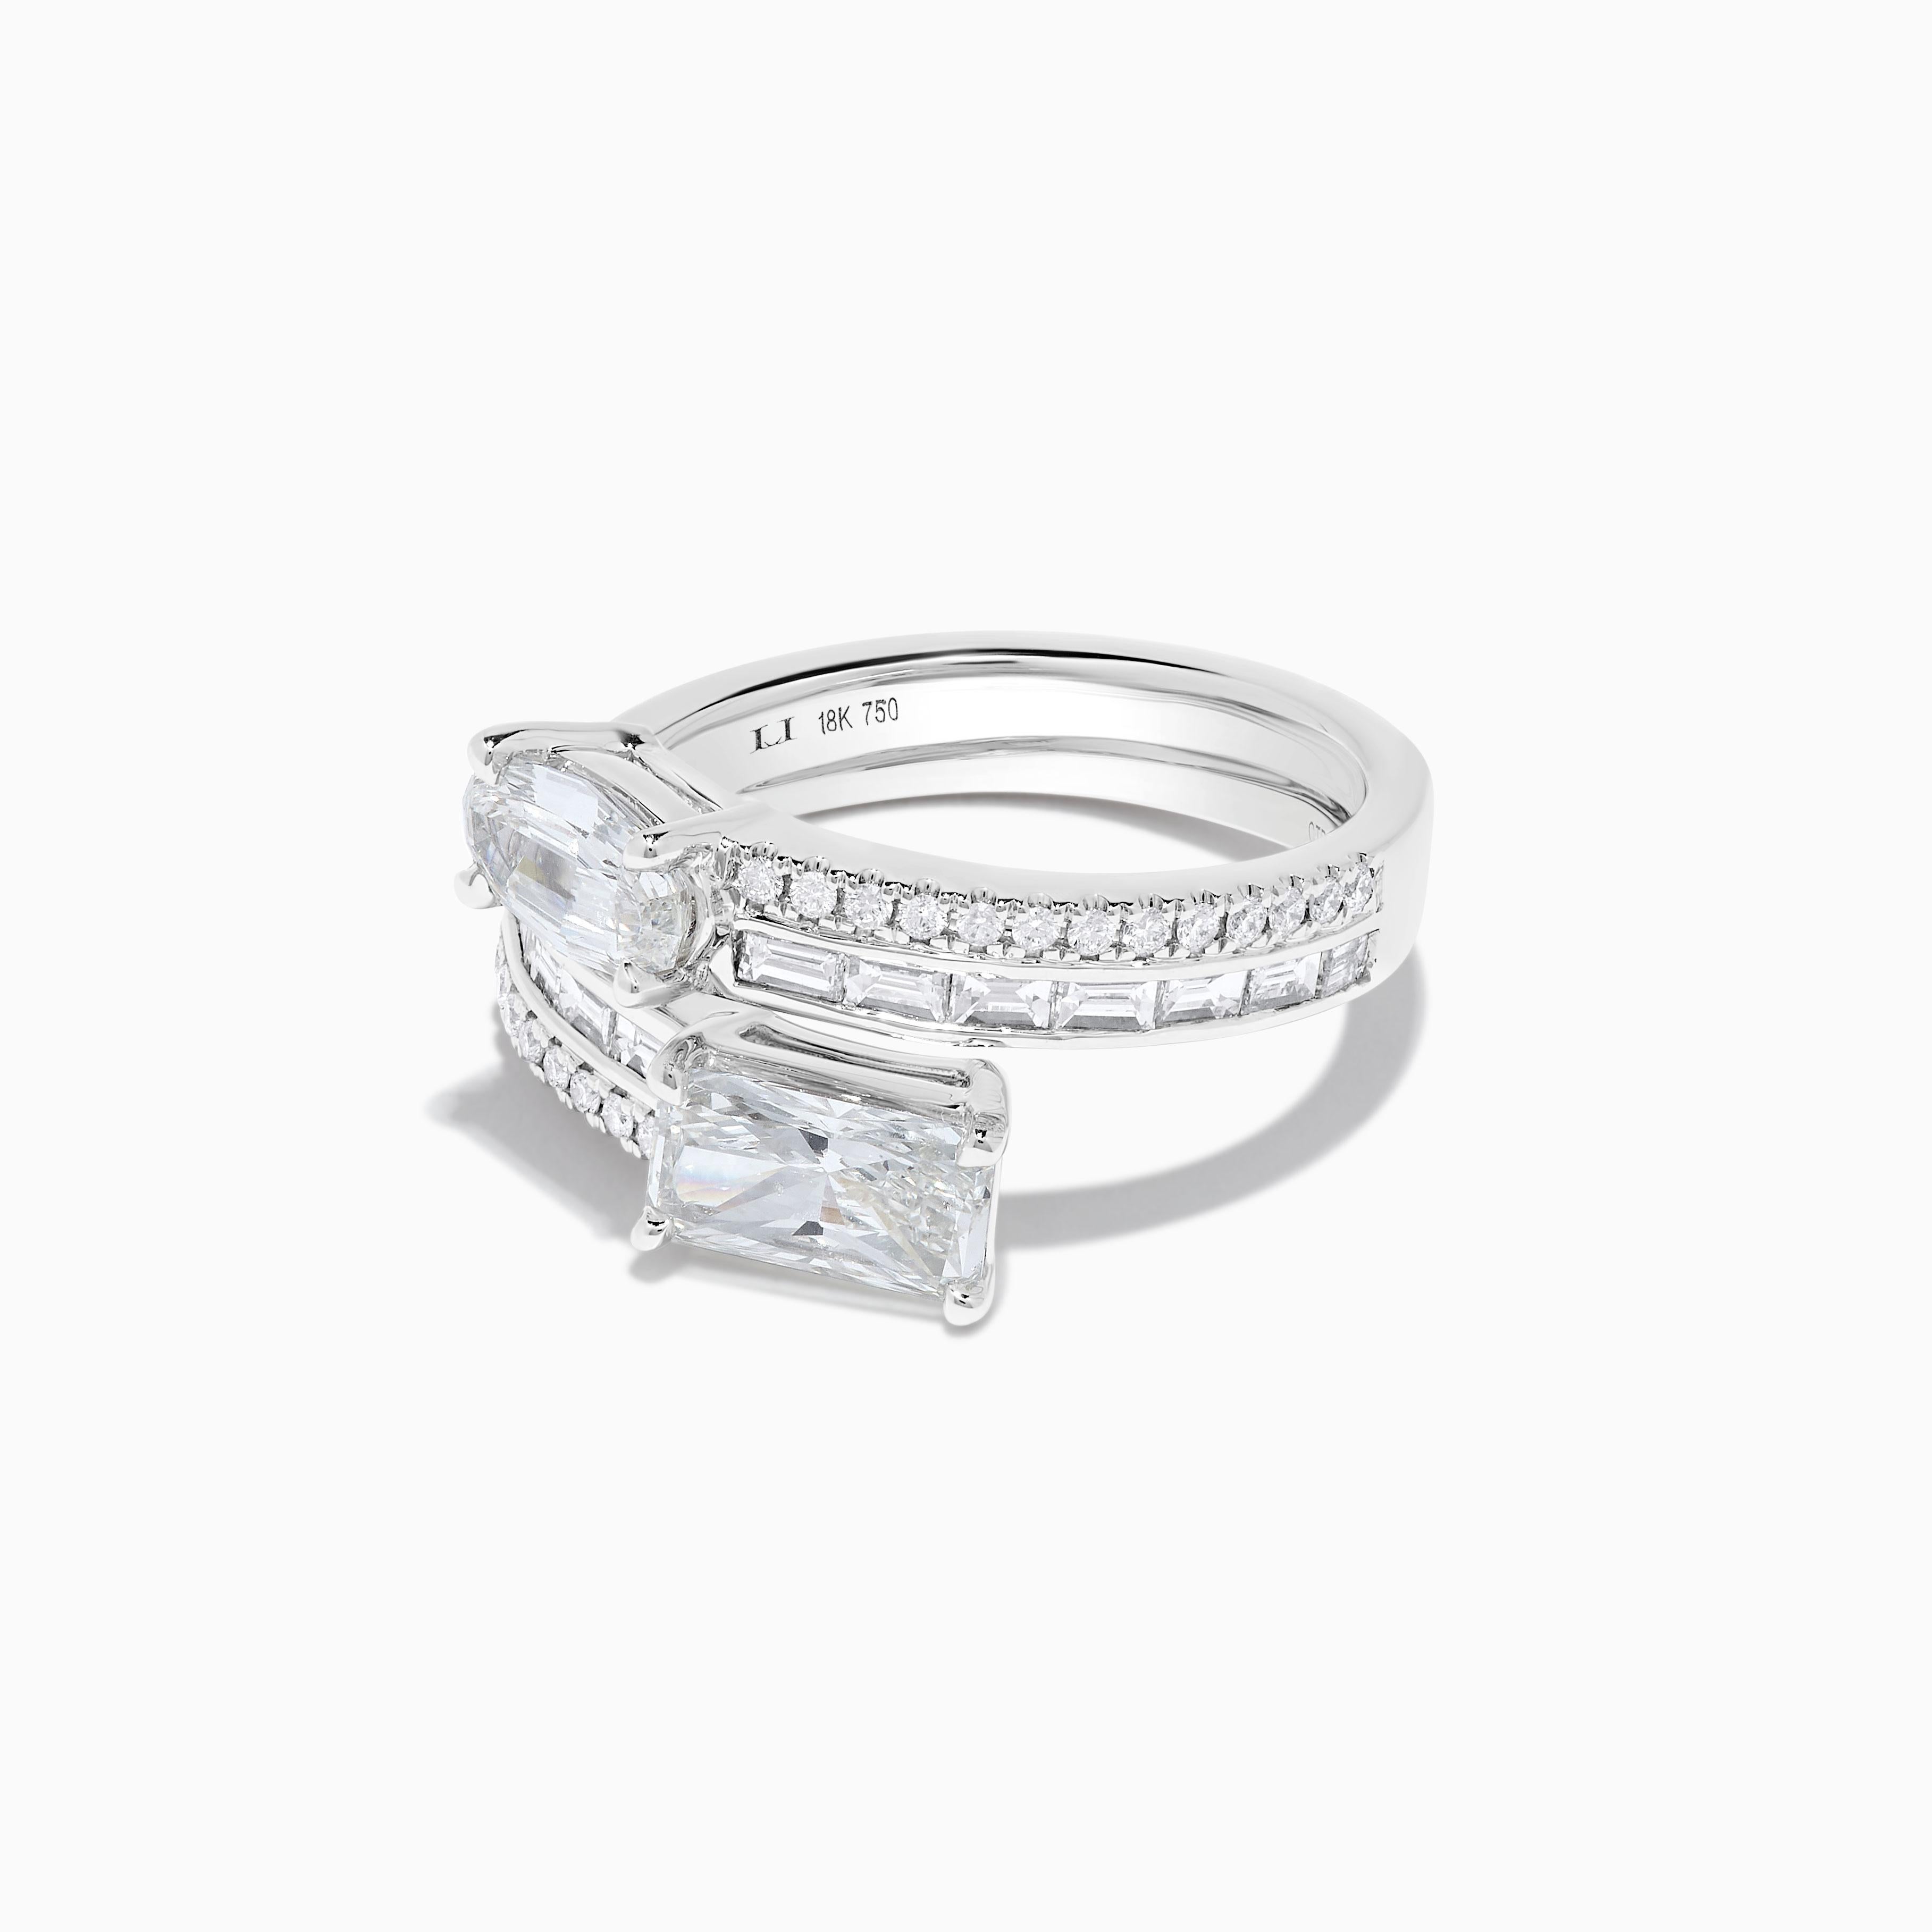 RareGemWorld's intriguing diamond ring. Mounted in a beautiful 18K White Gold setting with a natural radiant cut white diamond and a natural oval cut white diamond. These diamonds are surrounded by natural baguette cut white diamonds and natural